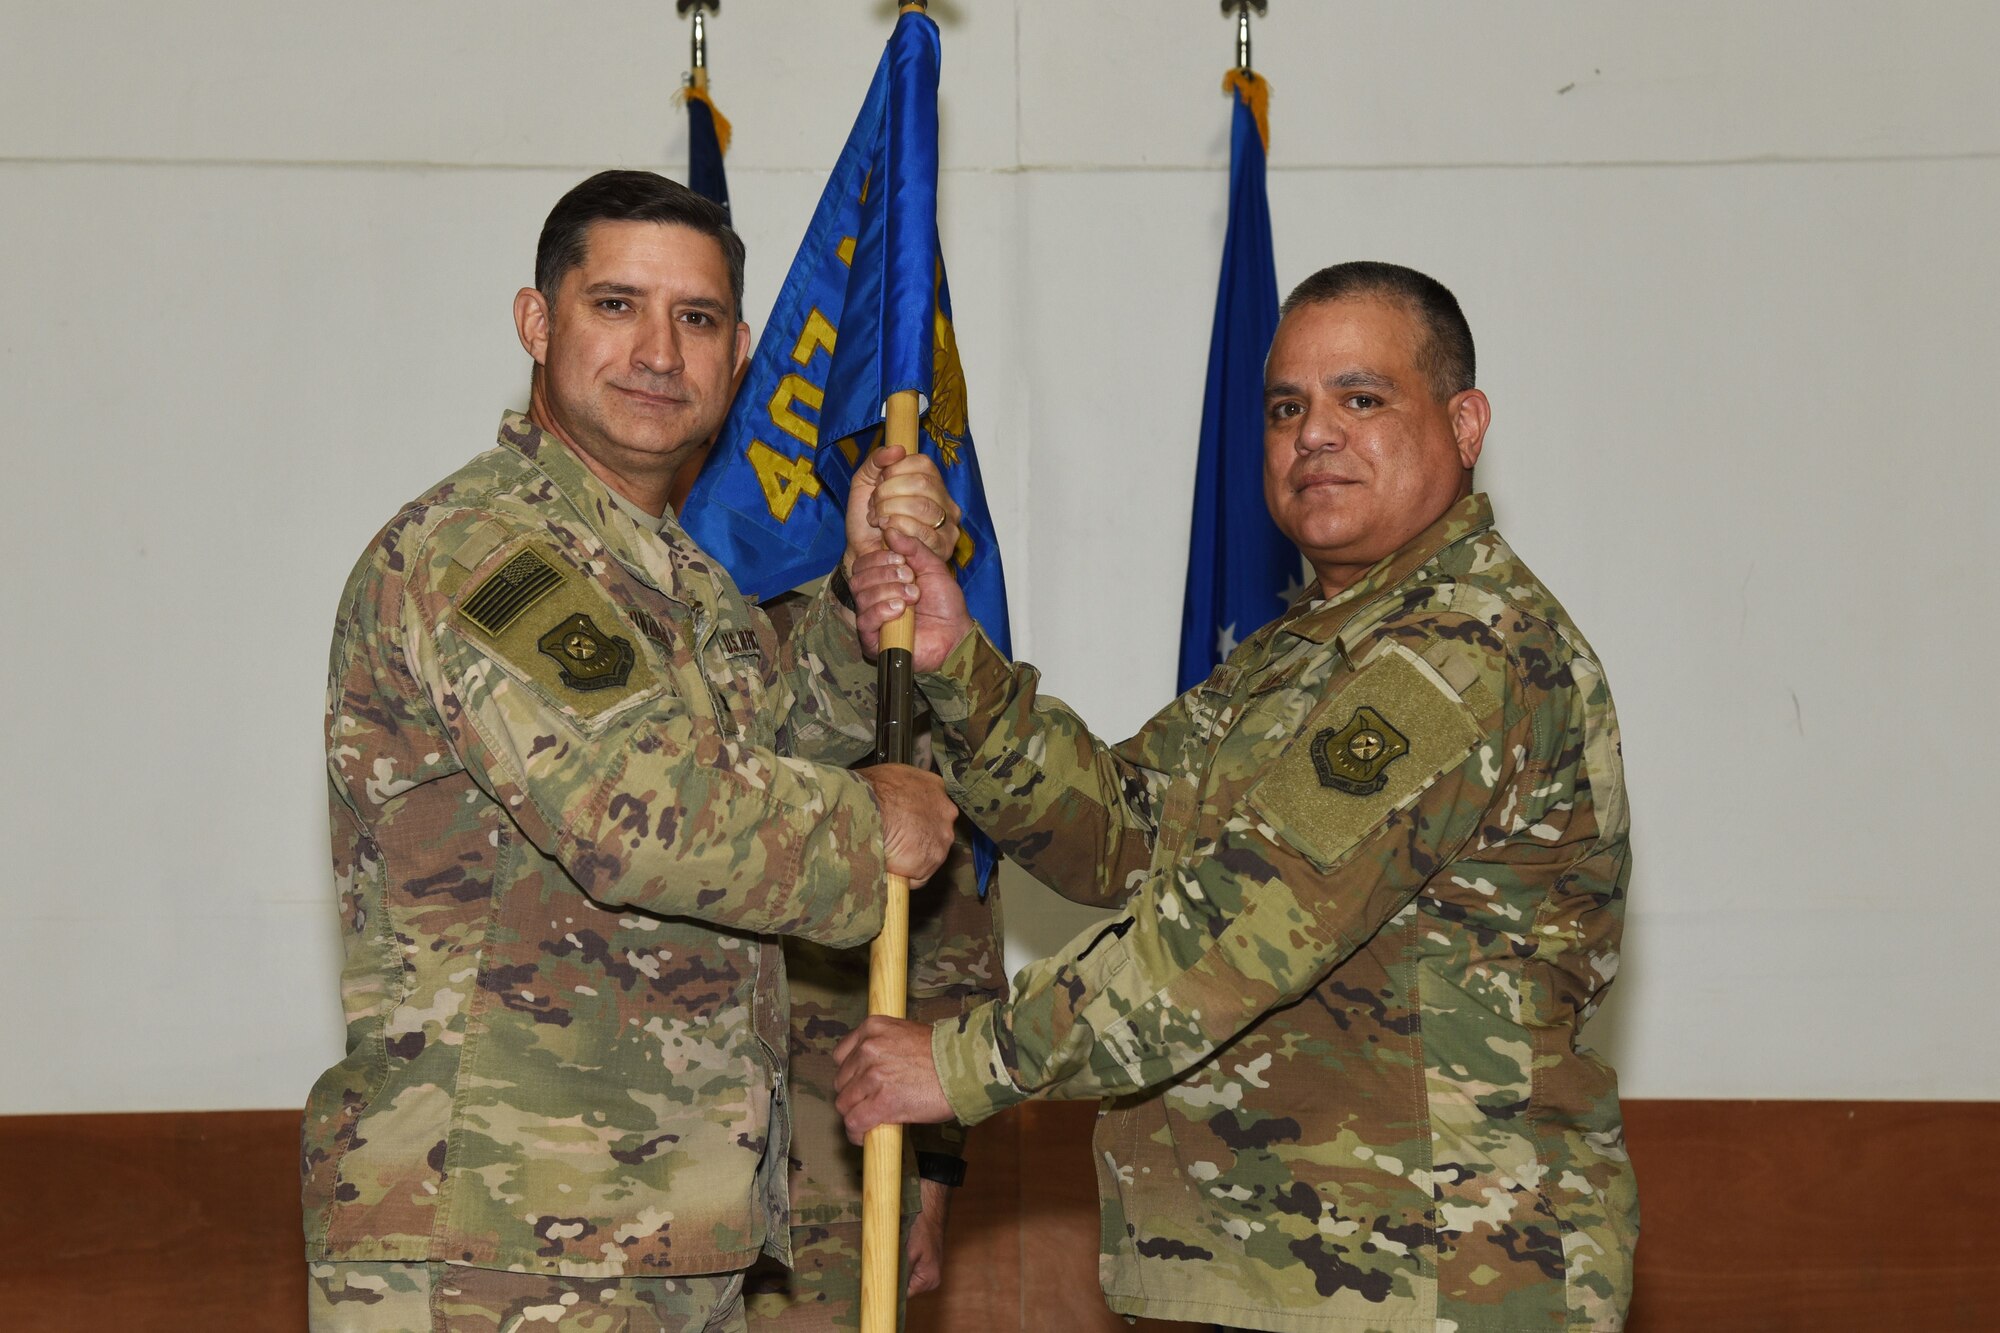 U.S. Air Force Col. John Gonzales, 407th Air Expeditionary Group Commander, passes a guidon to Lt. Col. John Marang, 407th Expeditionary Logistics Readiness Squadron Commander, in Southwest Asia, January 25, 2018. The change of command ceremony is a time honored military tradition that signifies the orderly transfer of authority. (U.S. Air Force photo by Staff Sgt. Joshua Edwards/Released)